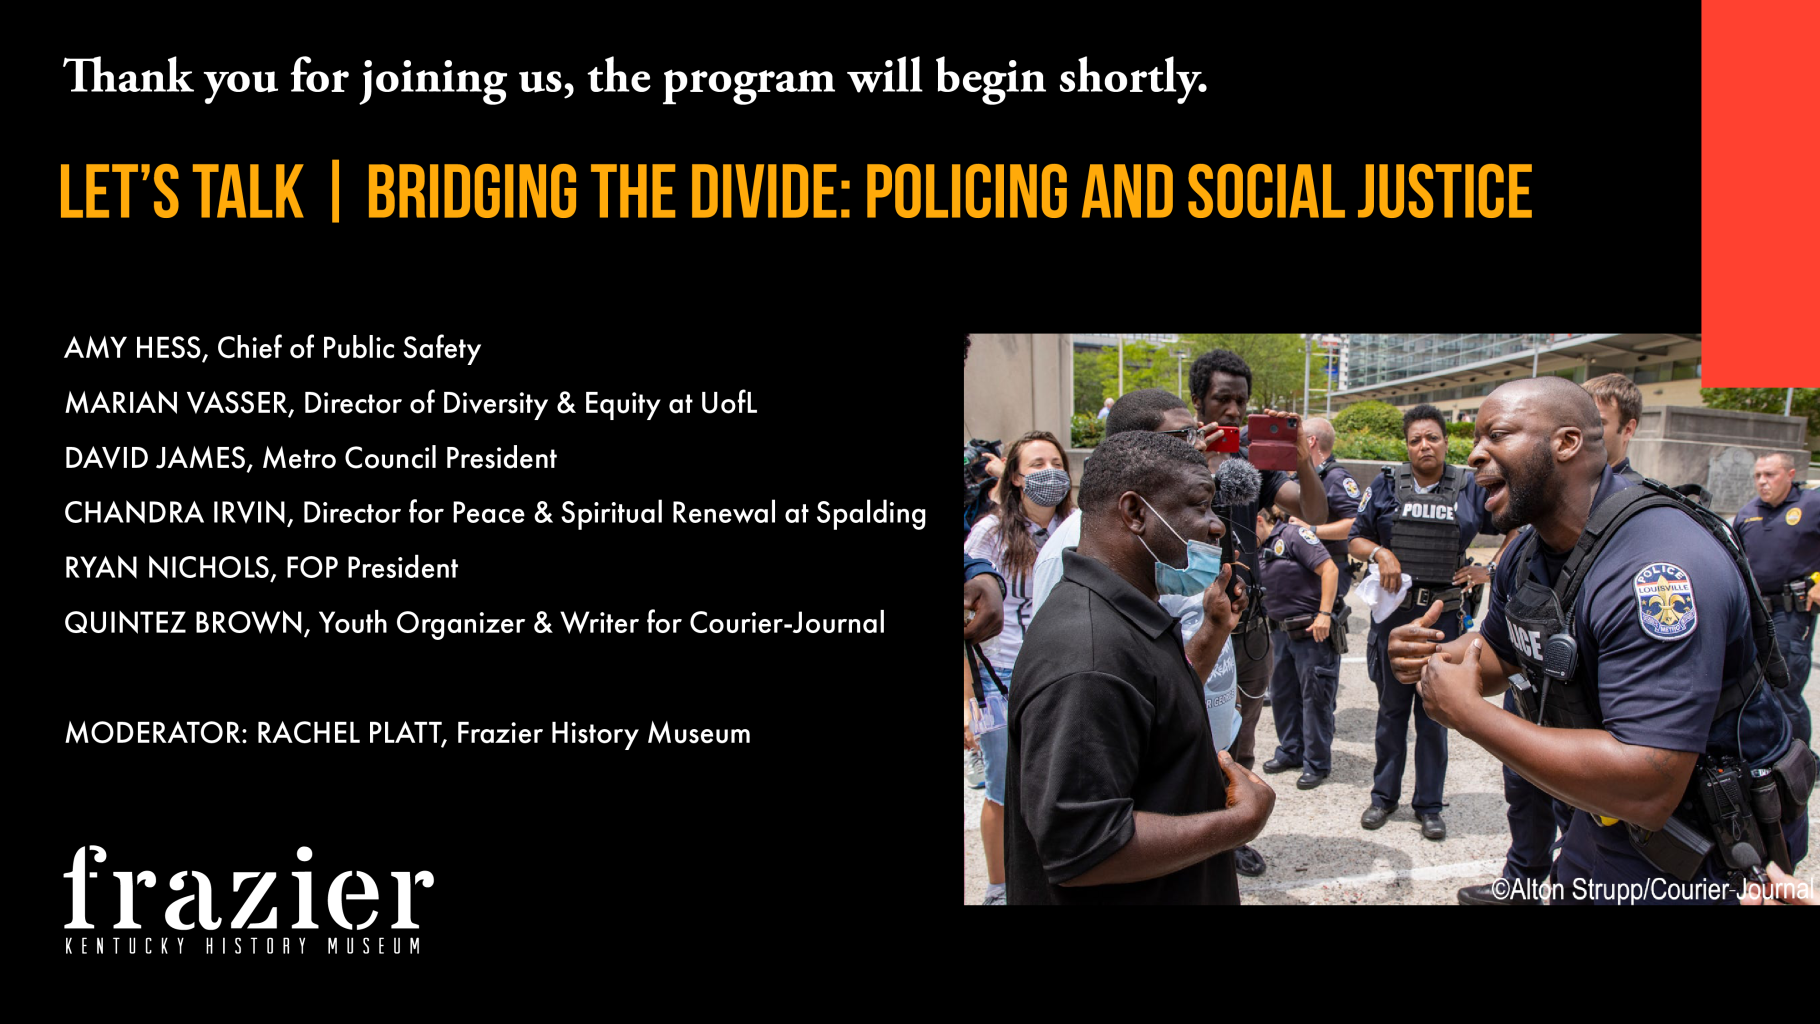 A flyer for the "Policing and Social Justice" event with a photo of an argument between police and a protester